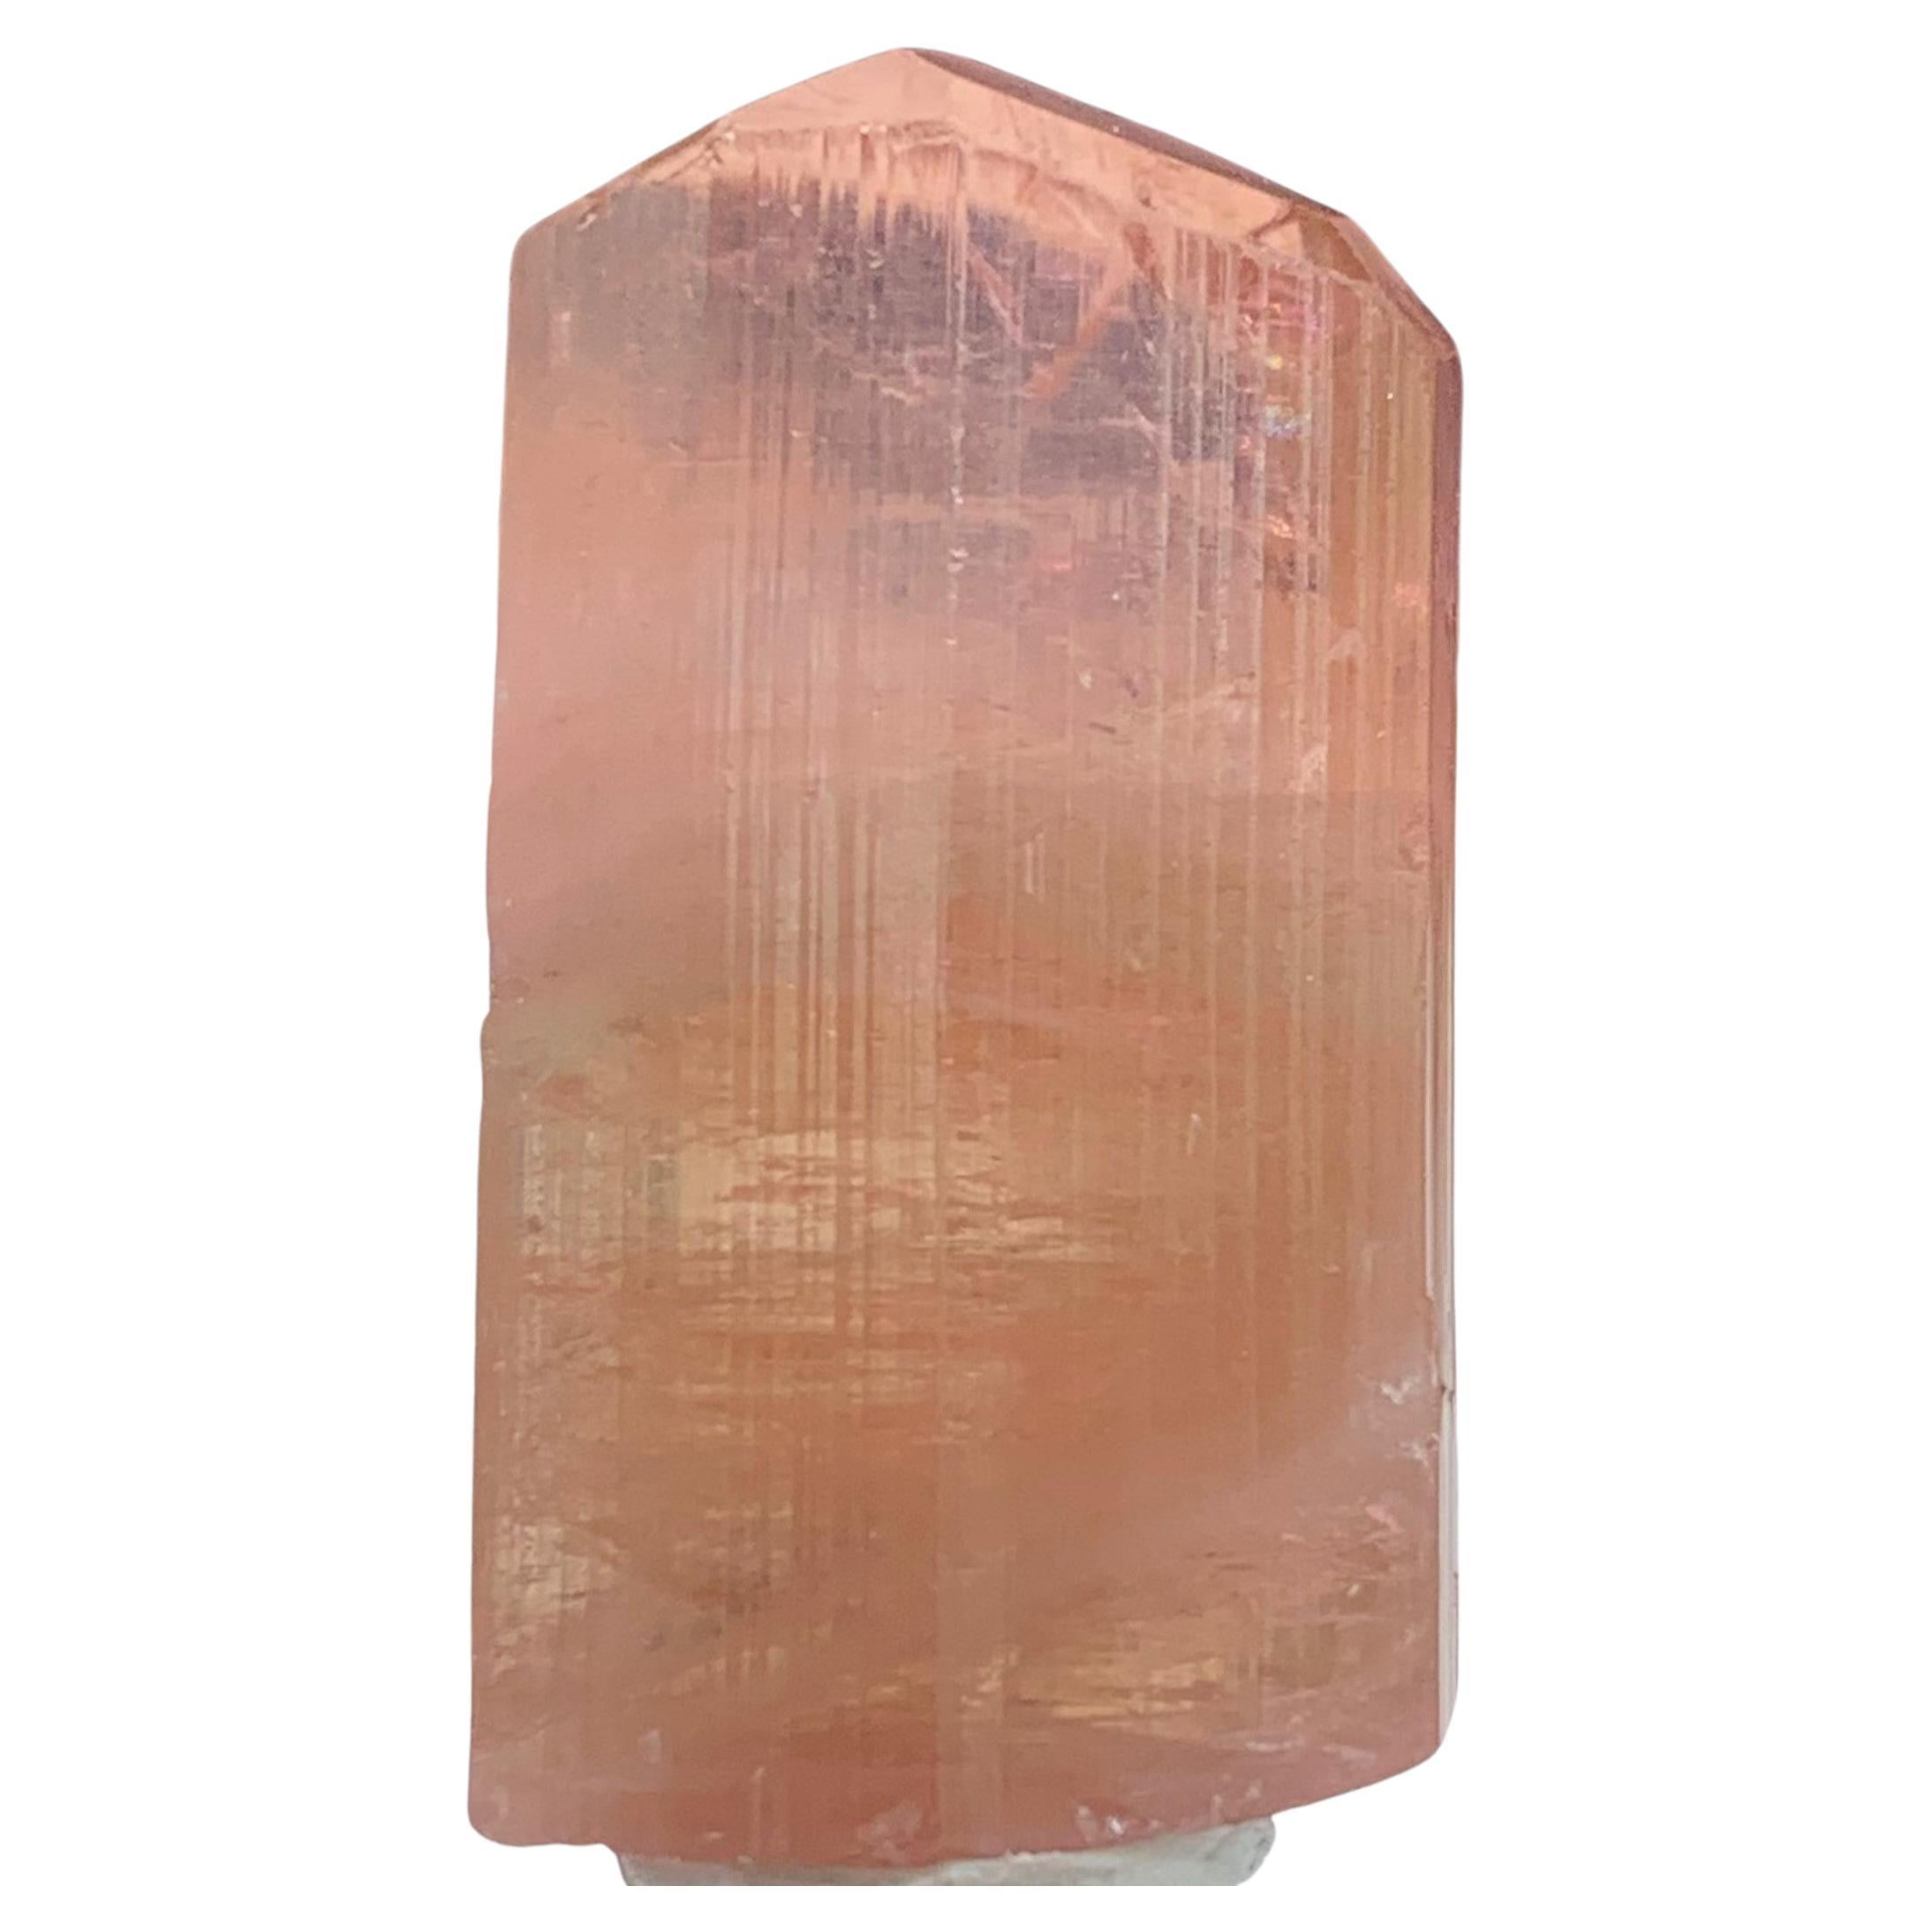 50.00 Carat Amazing Peach Color Terminated Tourmaline Crystal From Afghanistan For Sale